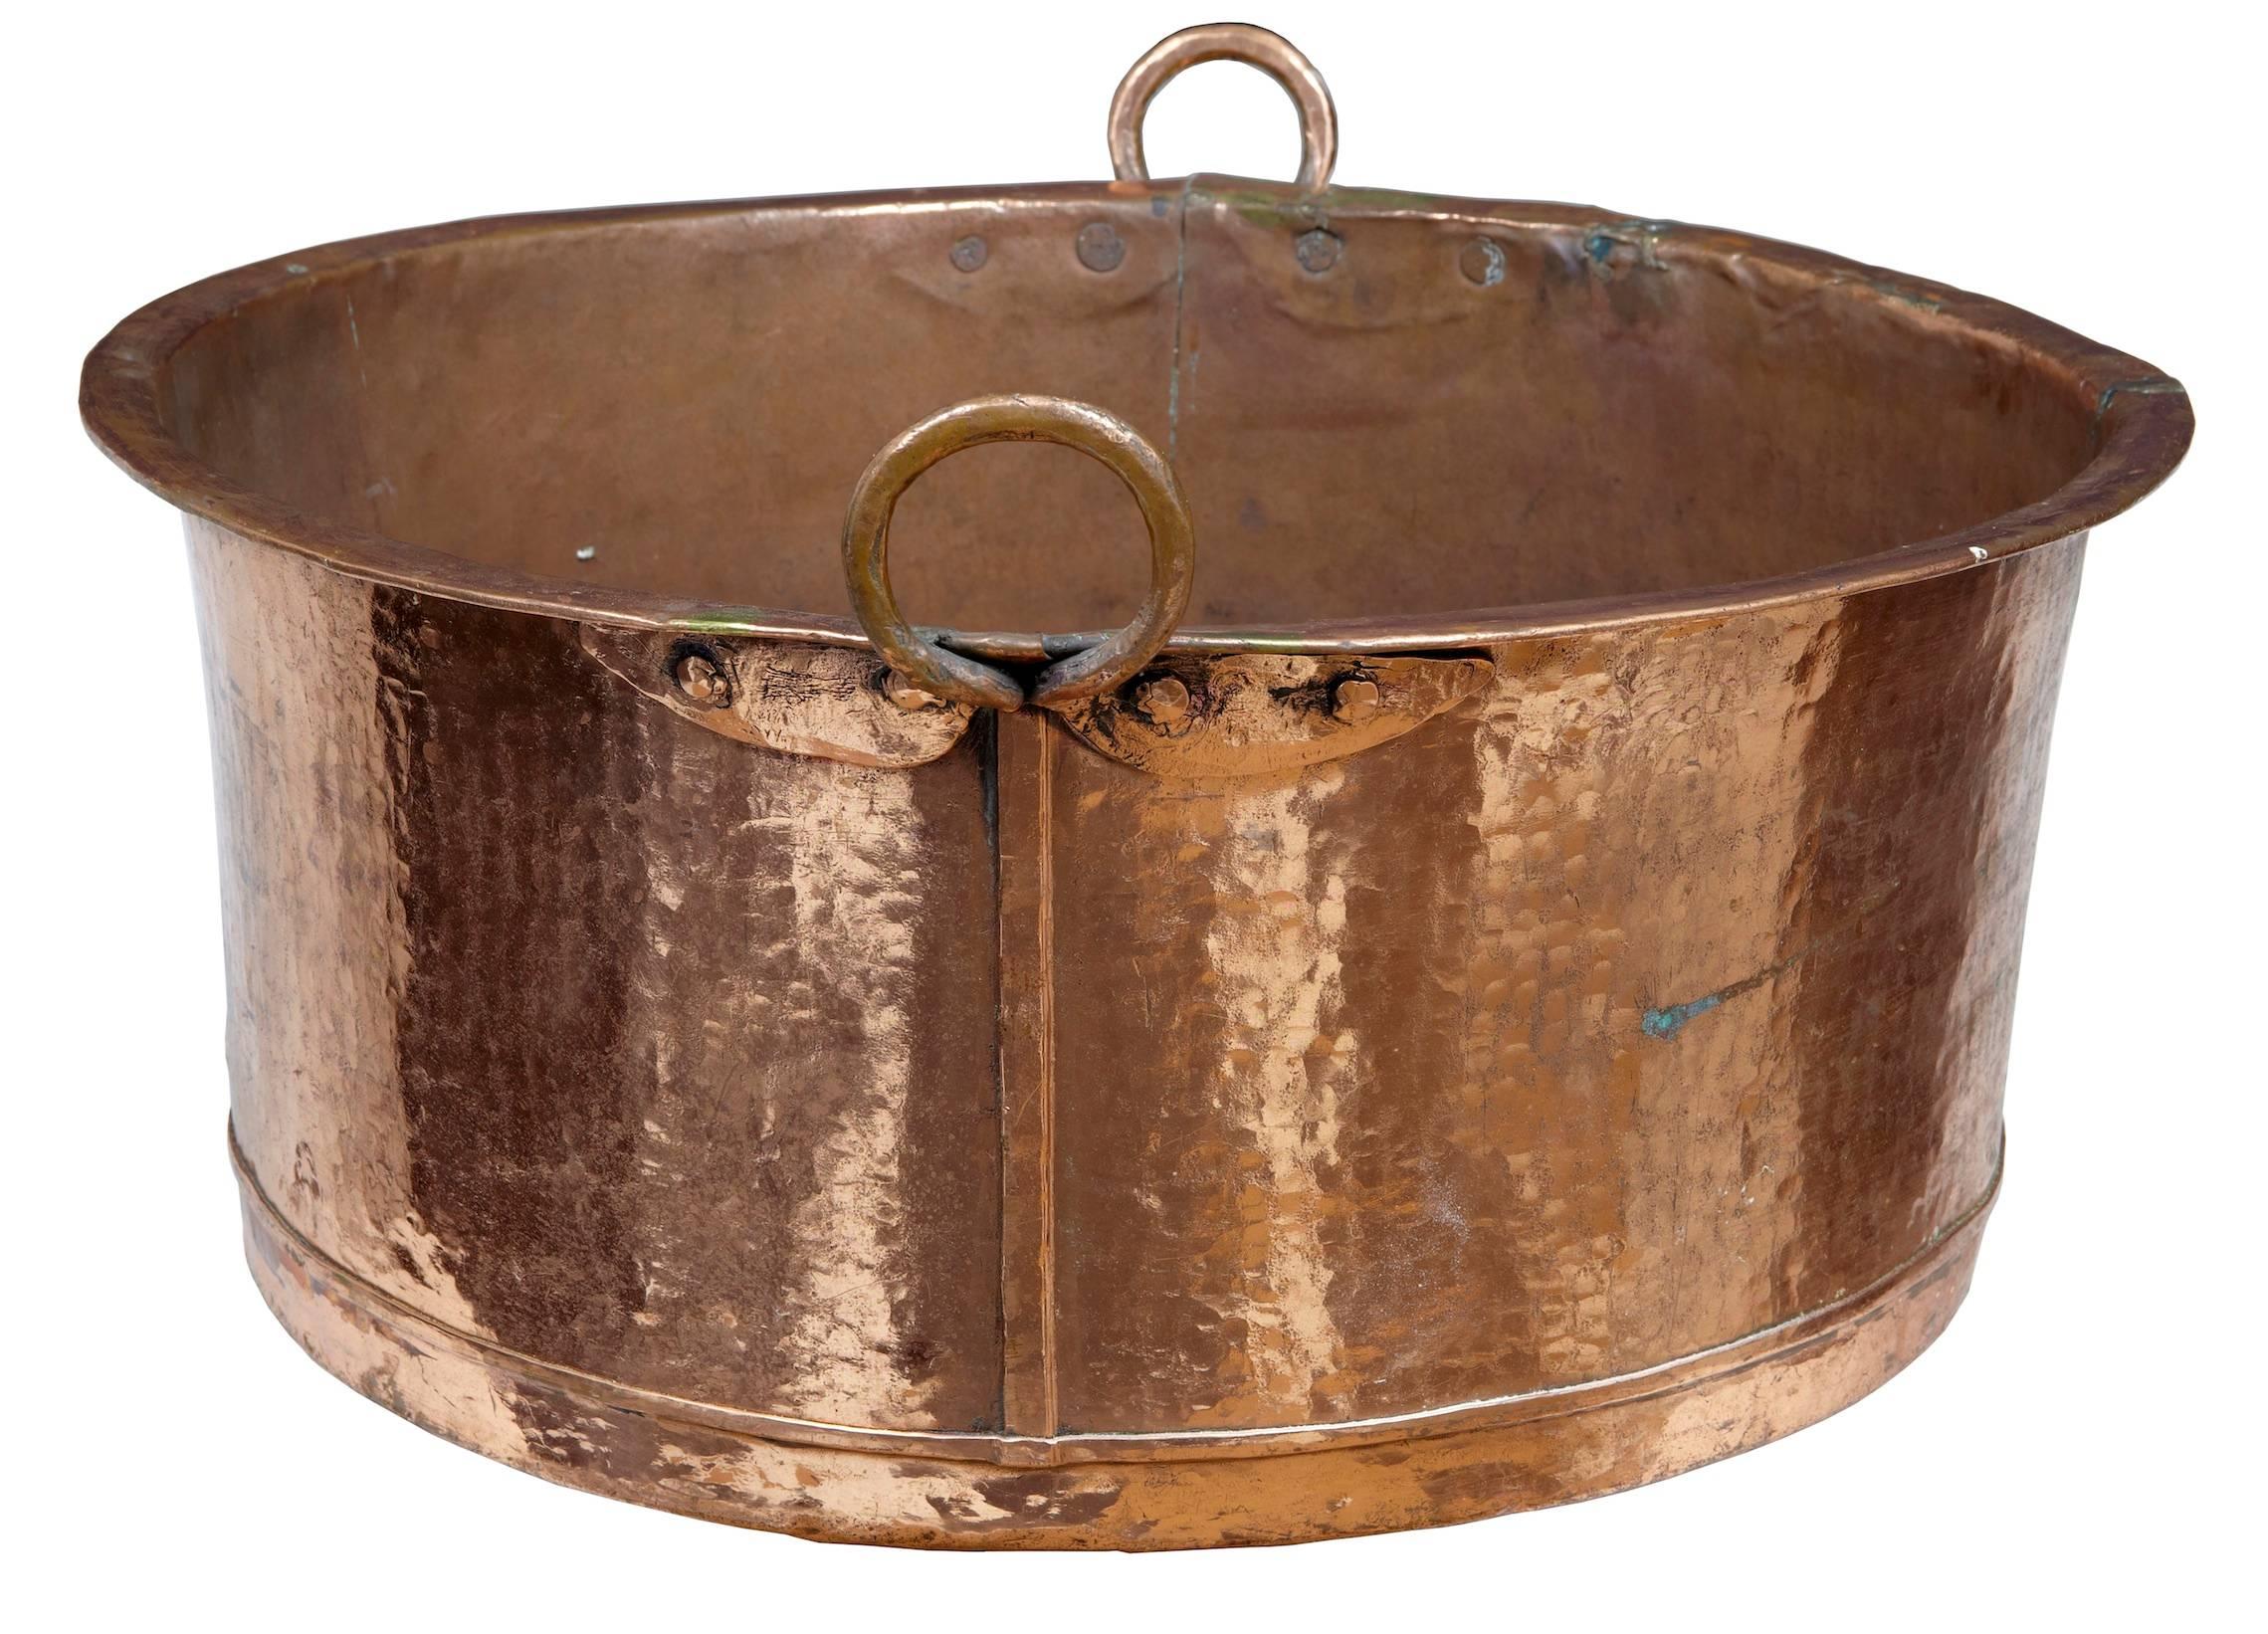 Good quality large handmade large cooking vessel, circa 1870.


Measures: Height 12 1/4